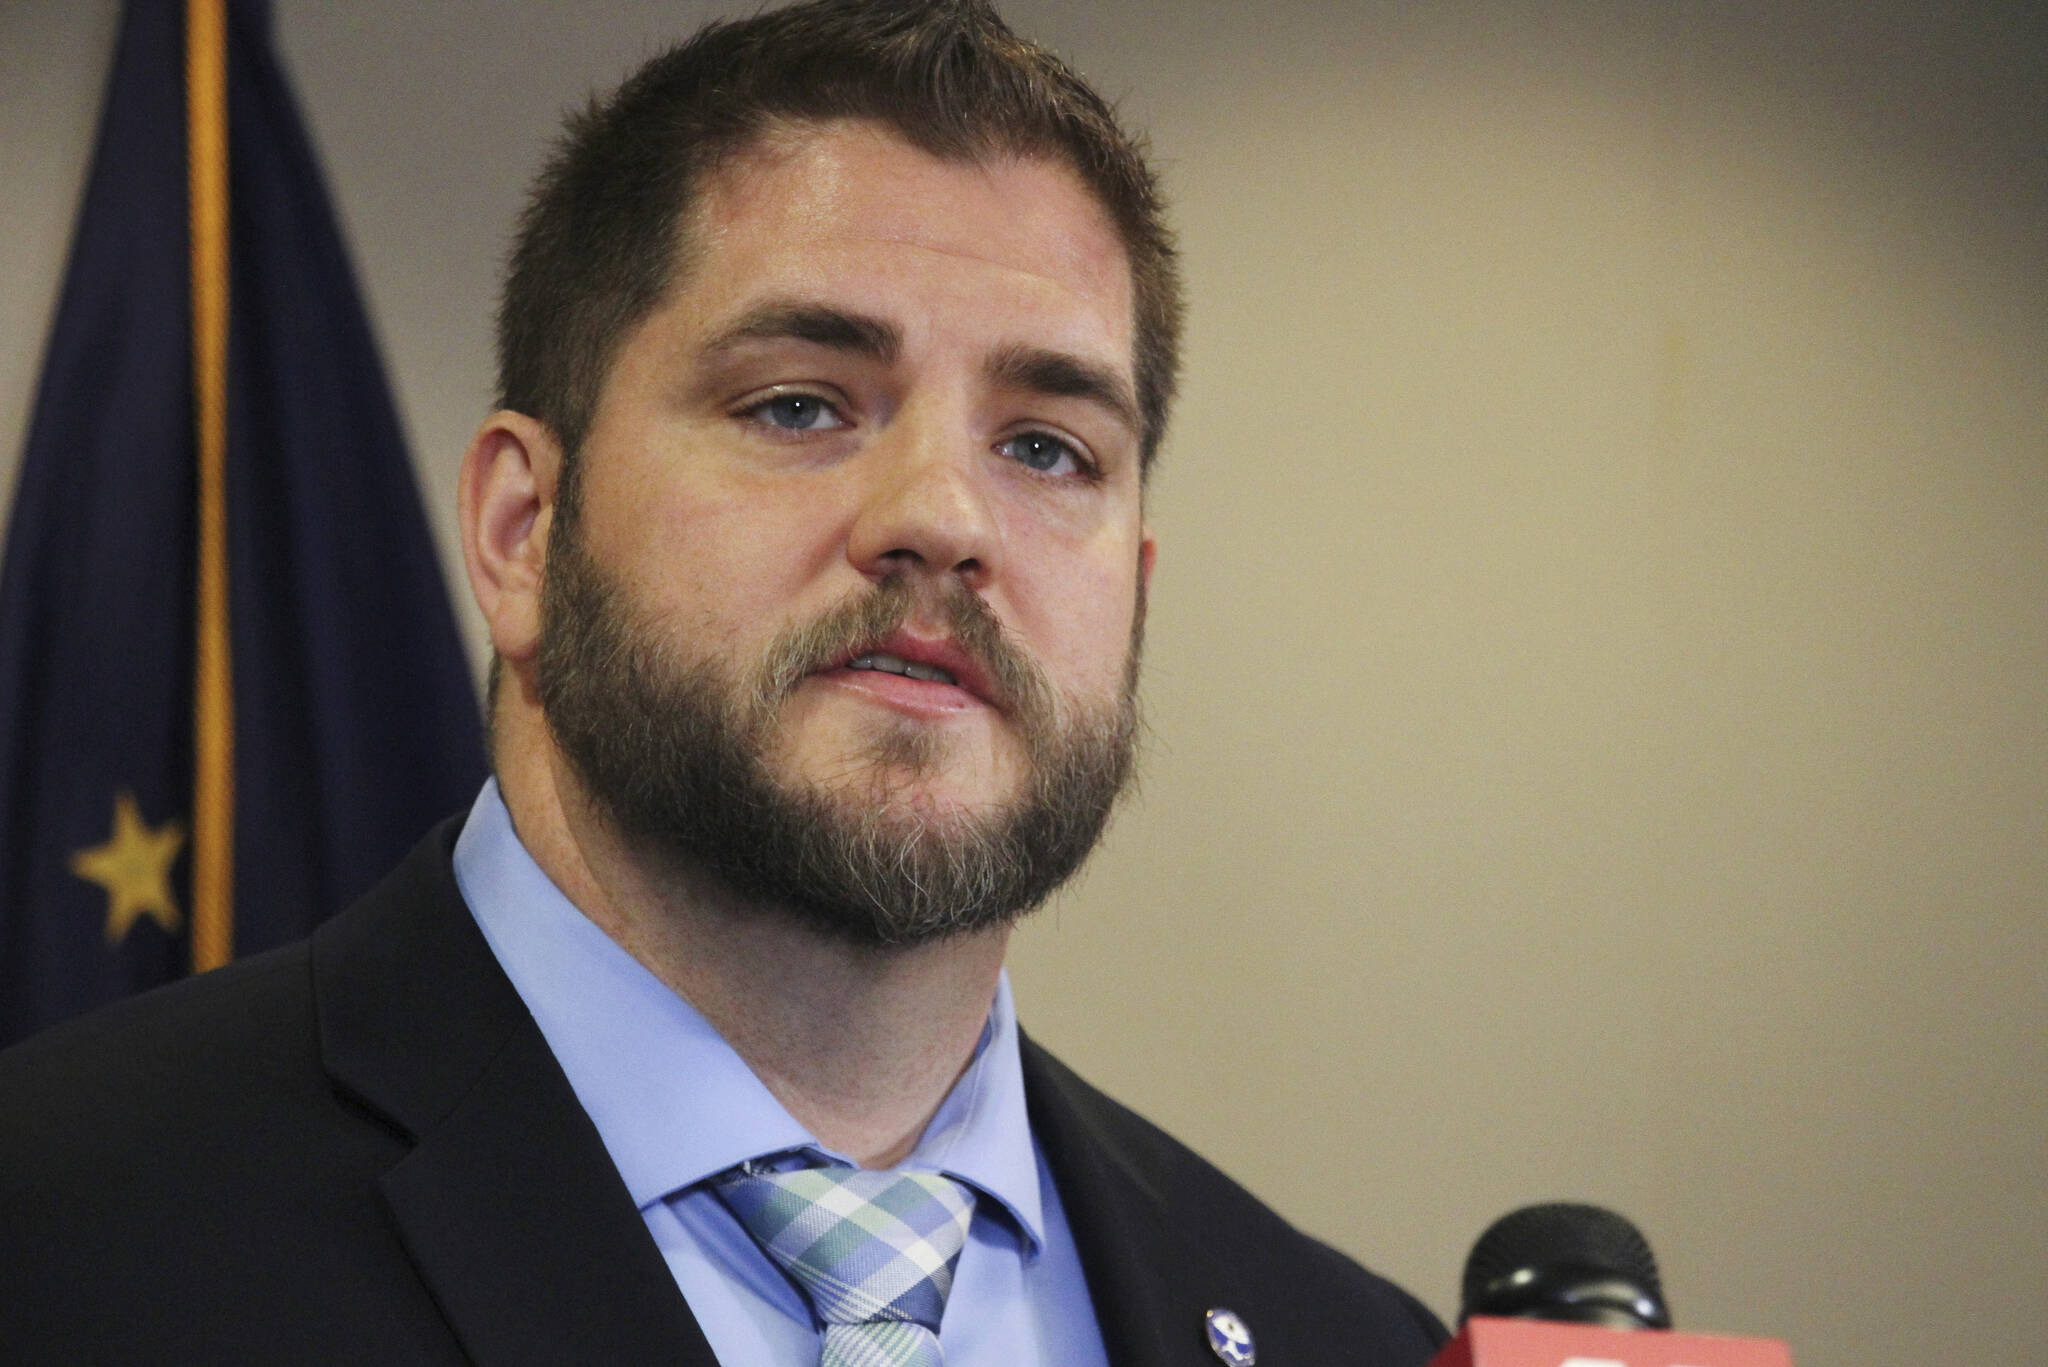 In this Monday, March 2, 2020, file photo, Alaska Department of Health and Social Services Commissioner Adam Crum addresses the state’s coronavirus preparedness at a news conference in Anchorage, Alaska. (AP Photo/Mark Thiessen, File)